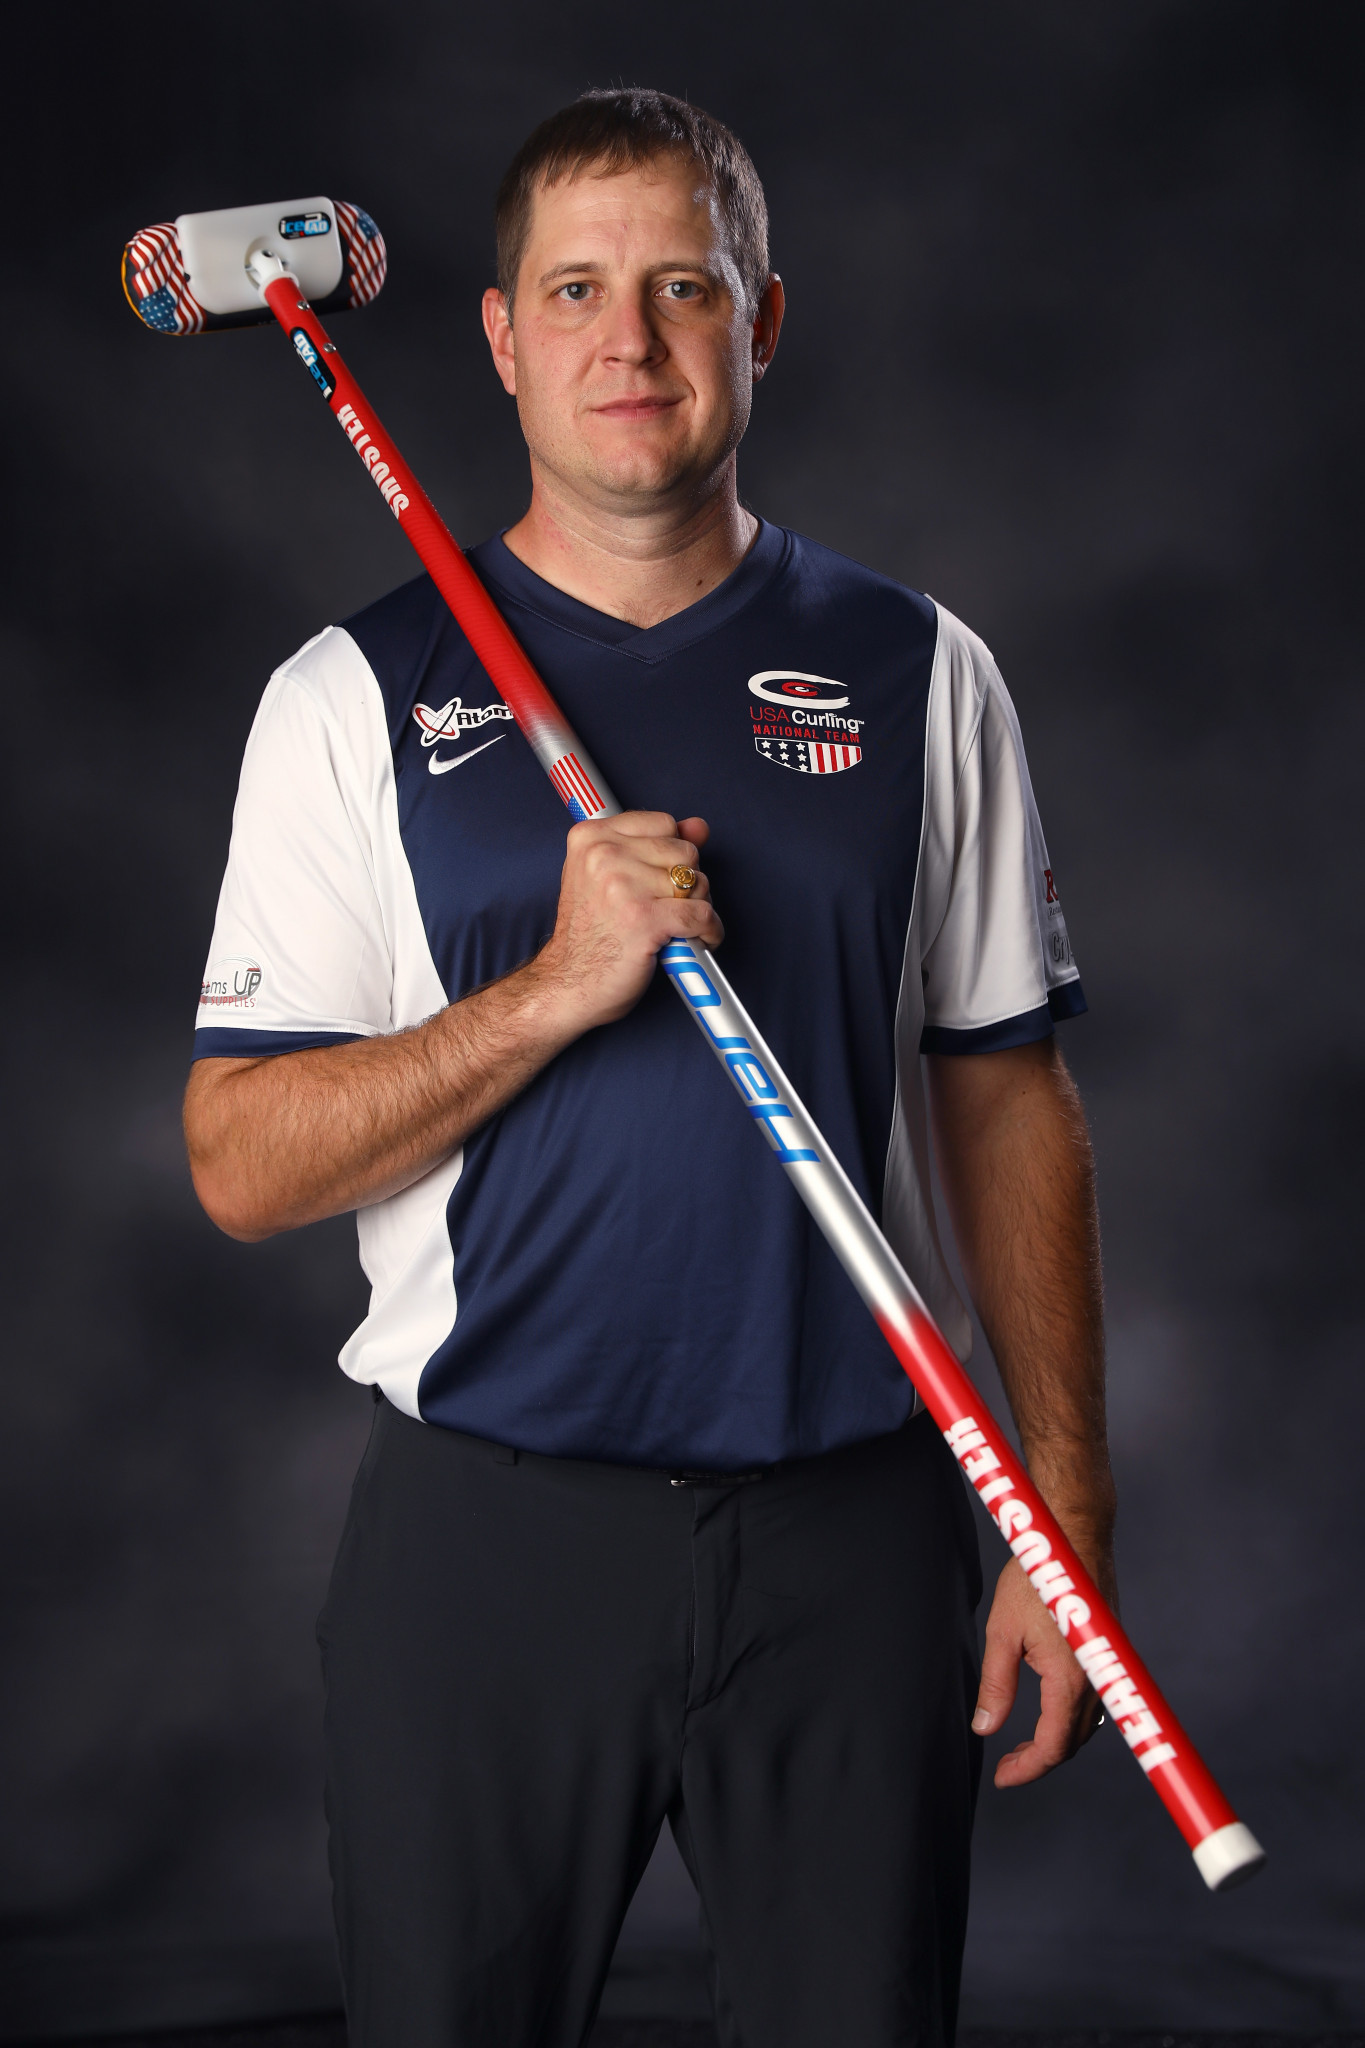 Veteran Olympian John Shuster is involved in a tight struggle with Heath McCormick in their fight to make Pyeongchang ©Getty Images